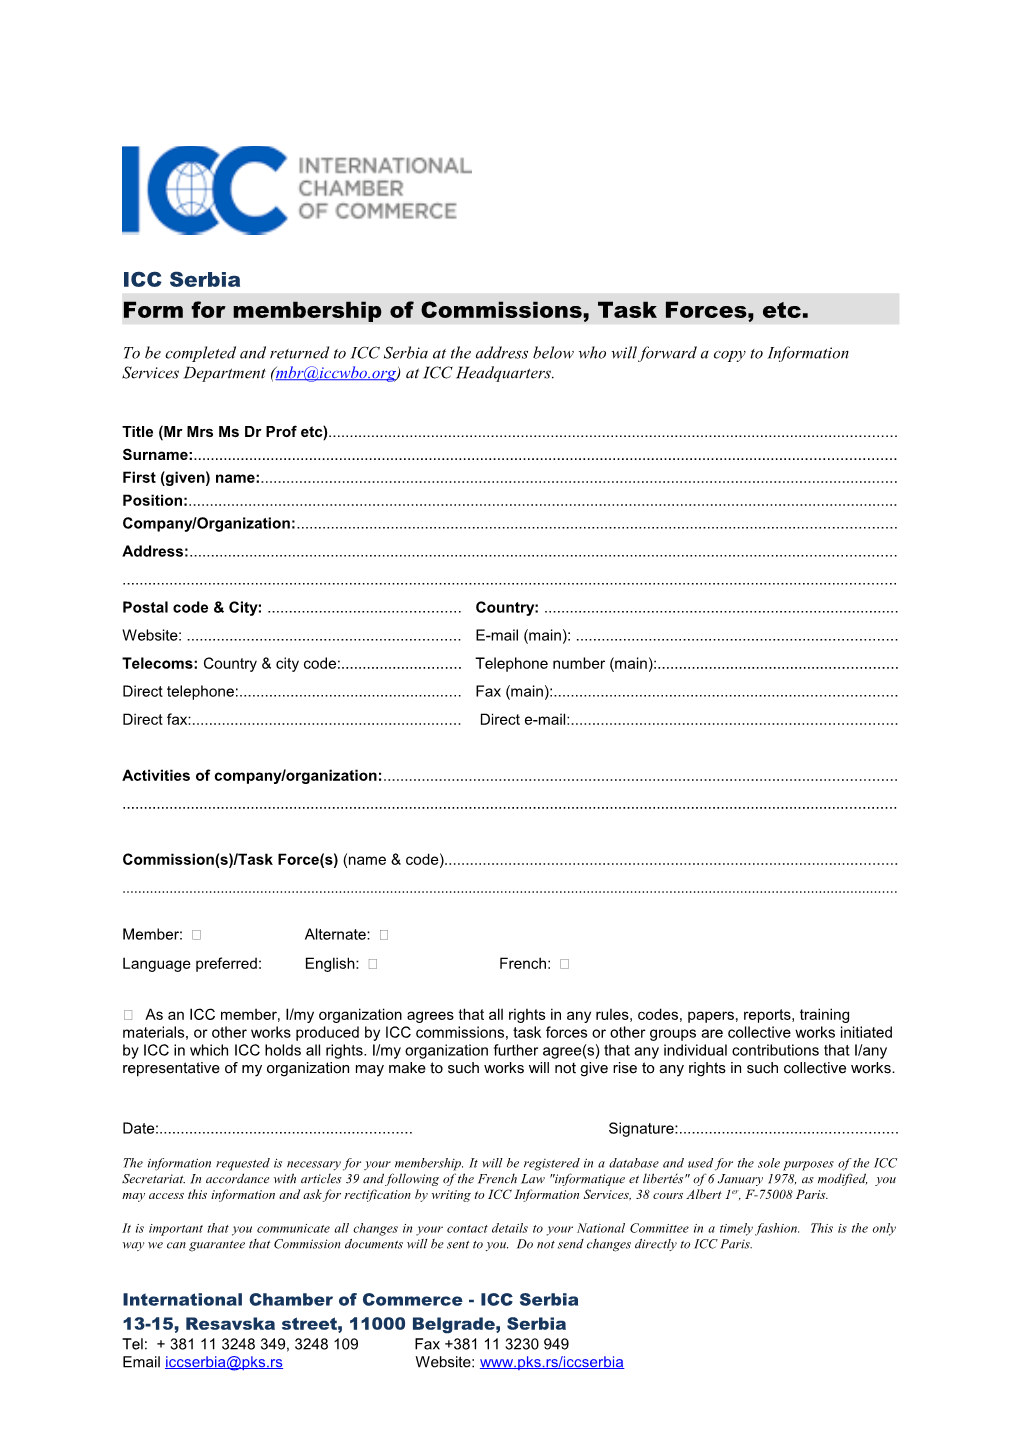 Form for Membership of Commissions, Task Forces, Etc